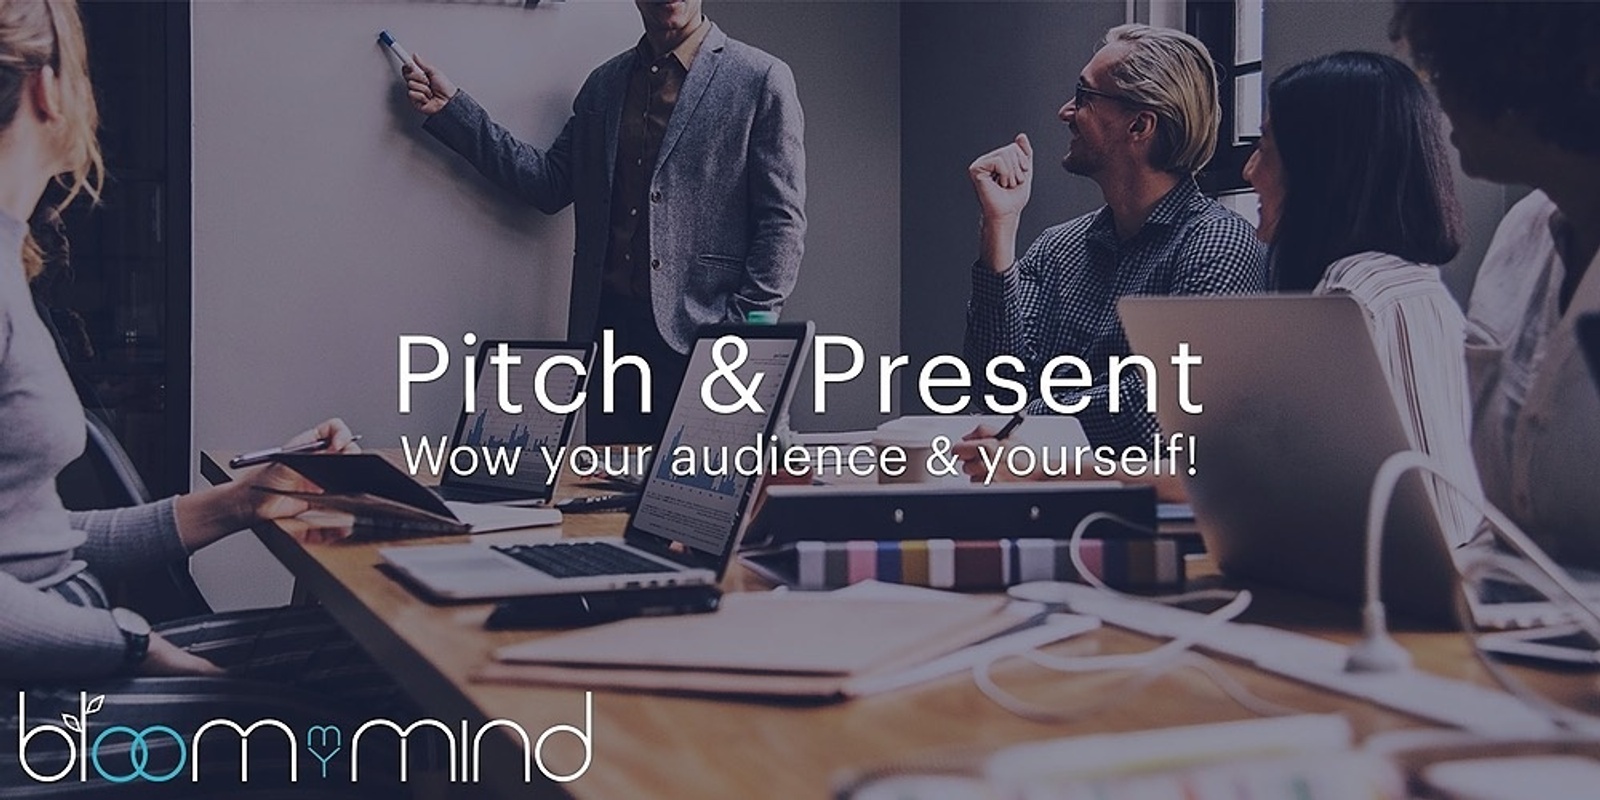 Banner image for Pitch & Present - Wow your audience & yourself!